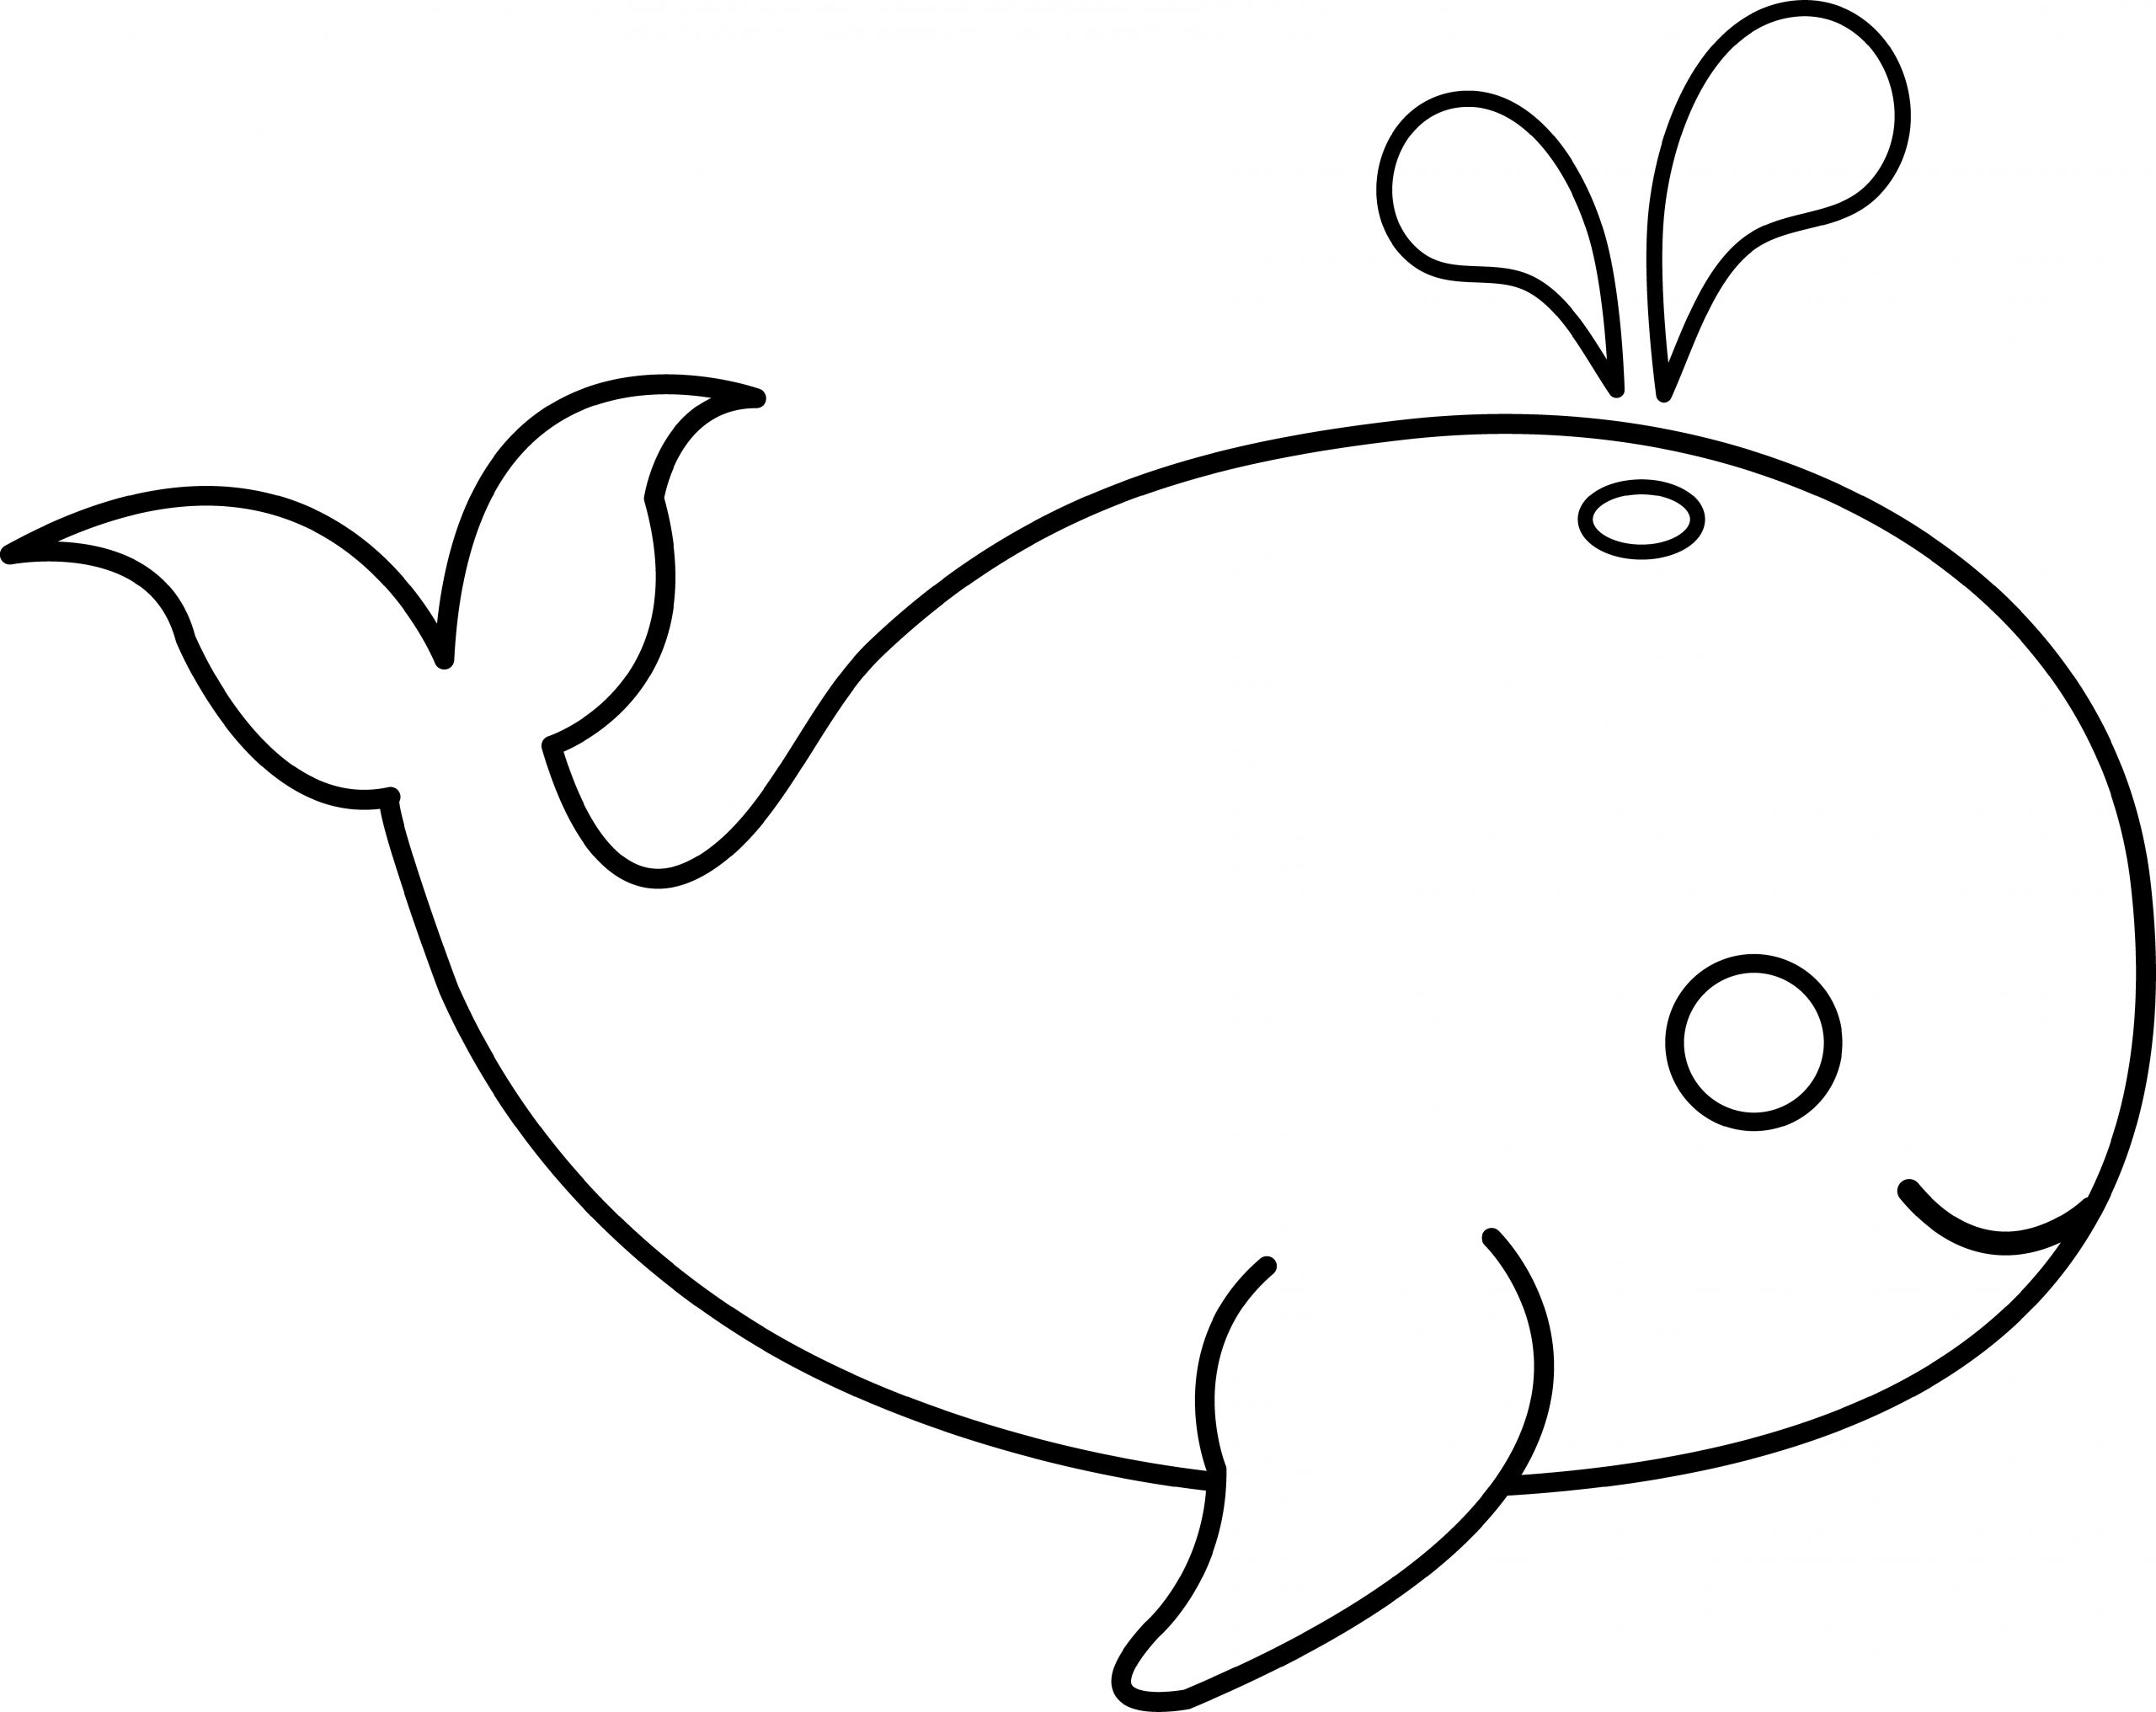 Whale Coloring Pages & Printables | 101 Coloring